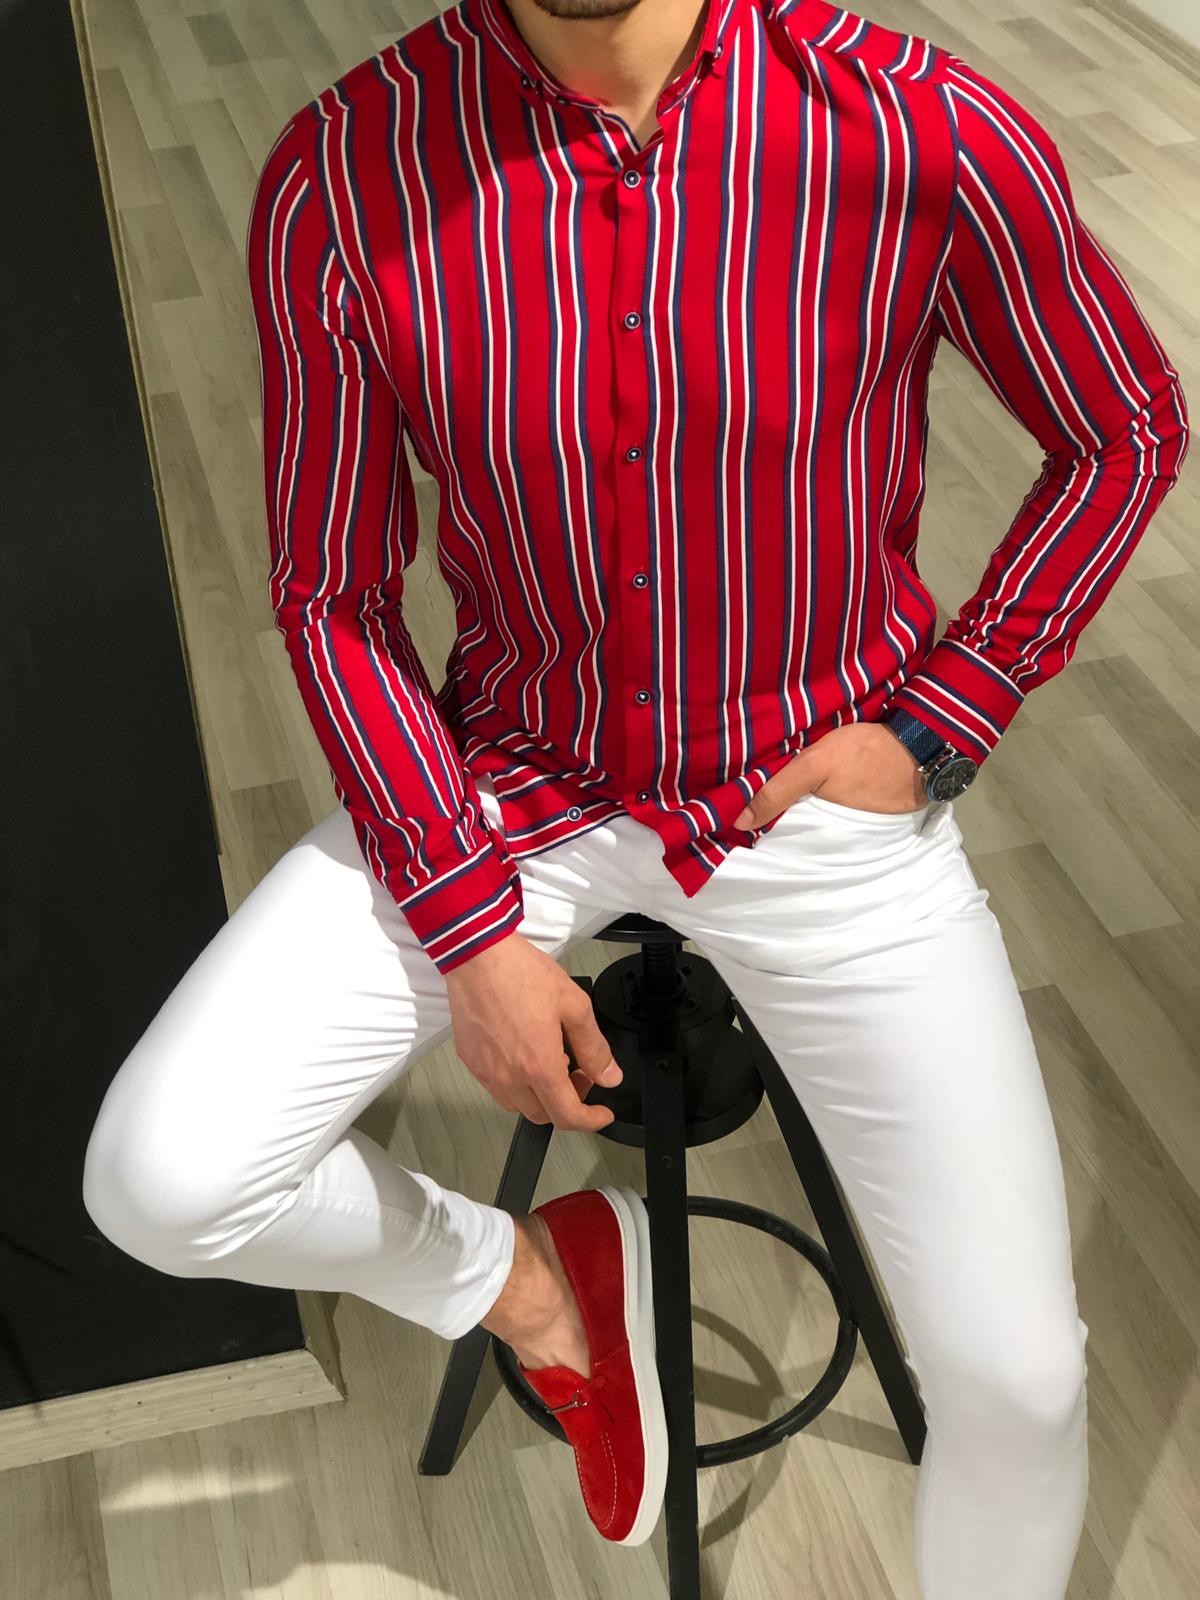 Red Striped Shirt + Jeans